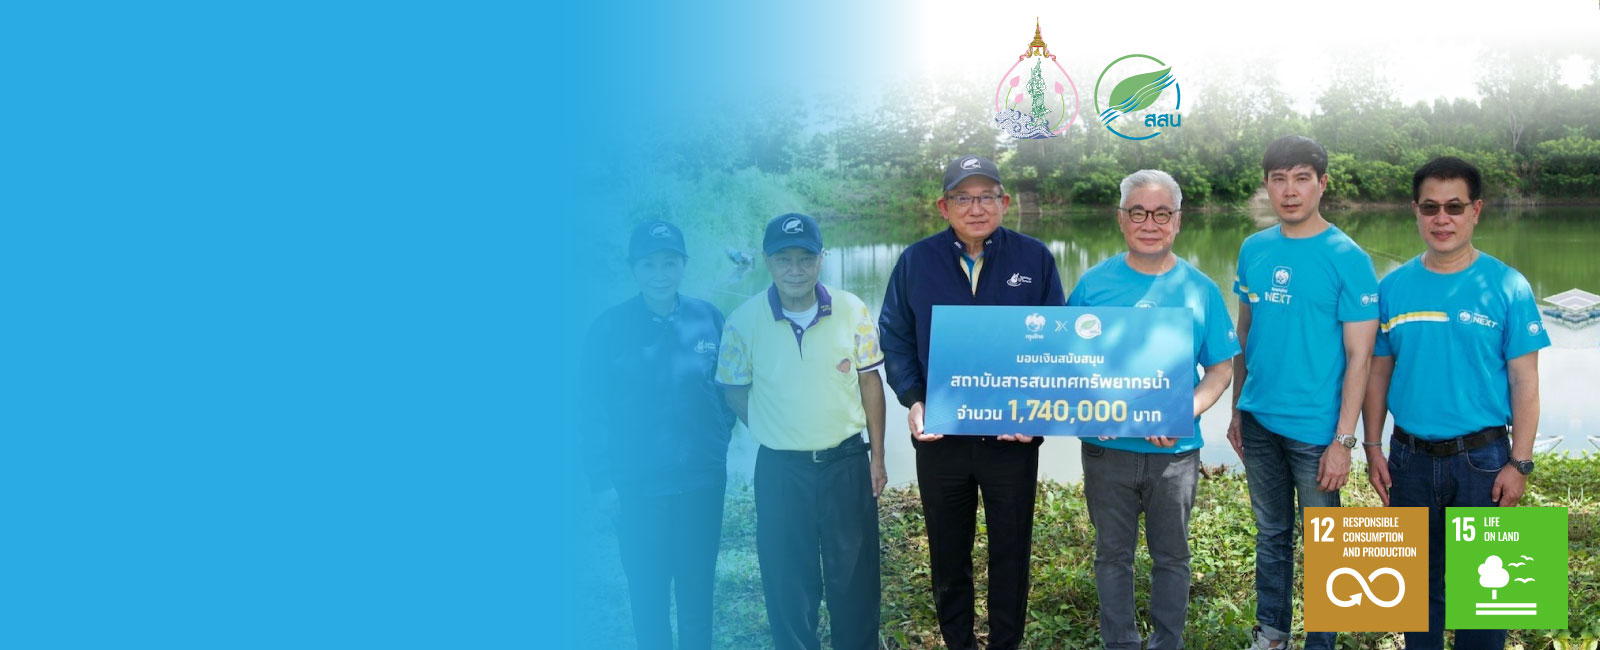 Krungthai Bank, in partnership with the Utokapat Foundation under the Royal Patronage of H.M. the ...